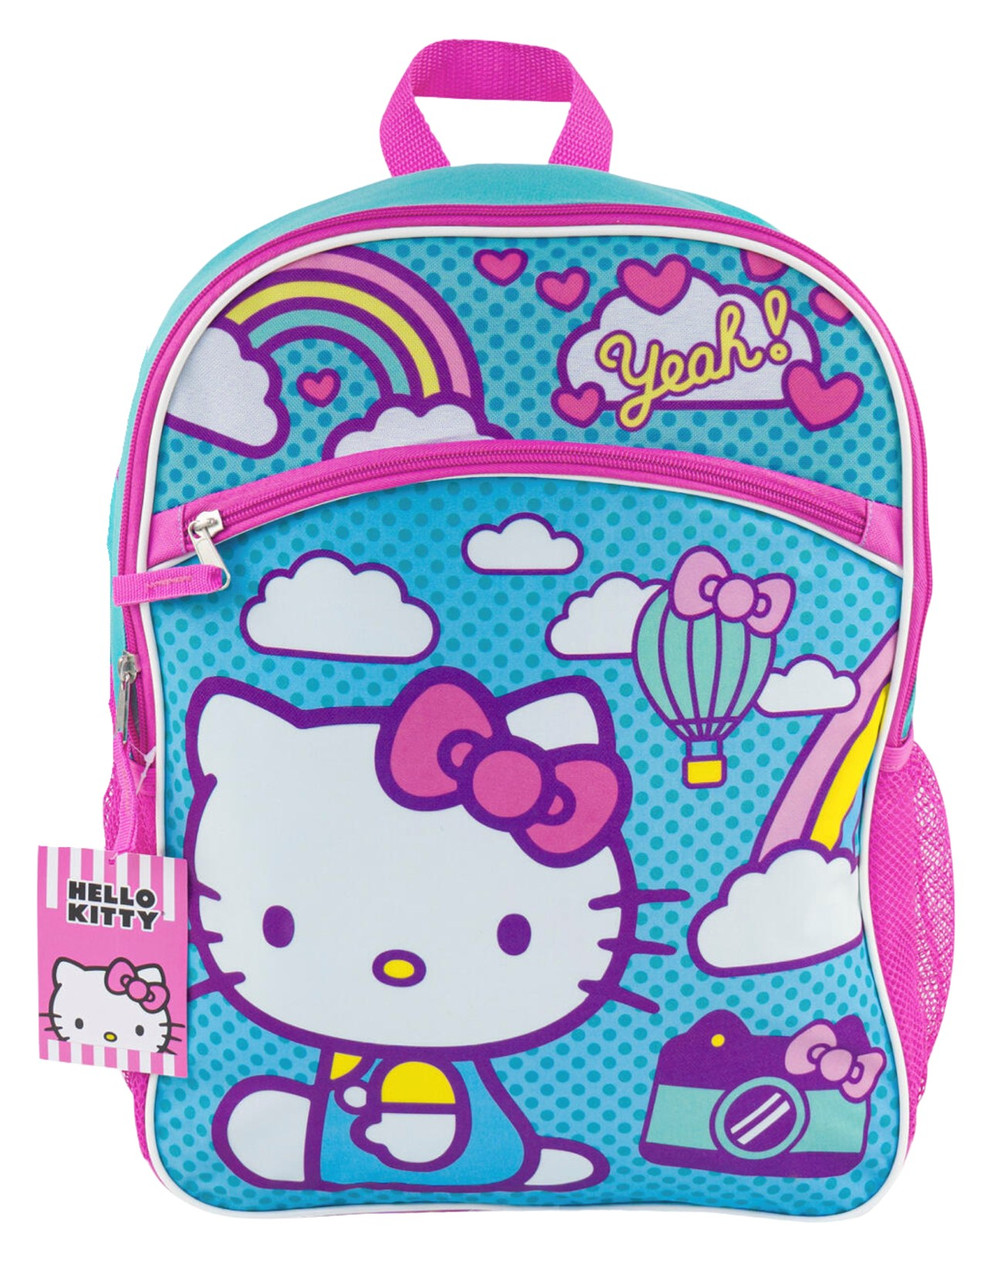 https://cdn11.bigcommerce.com/s-31ycg3ui3f/images/stencil/1280x1280/products/2007/6269/16in_Backpack_with_Pockets_-_Hello_Kitty_2__26716.1692383312.jpg?c=1?imbypass=on